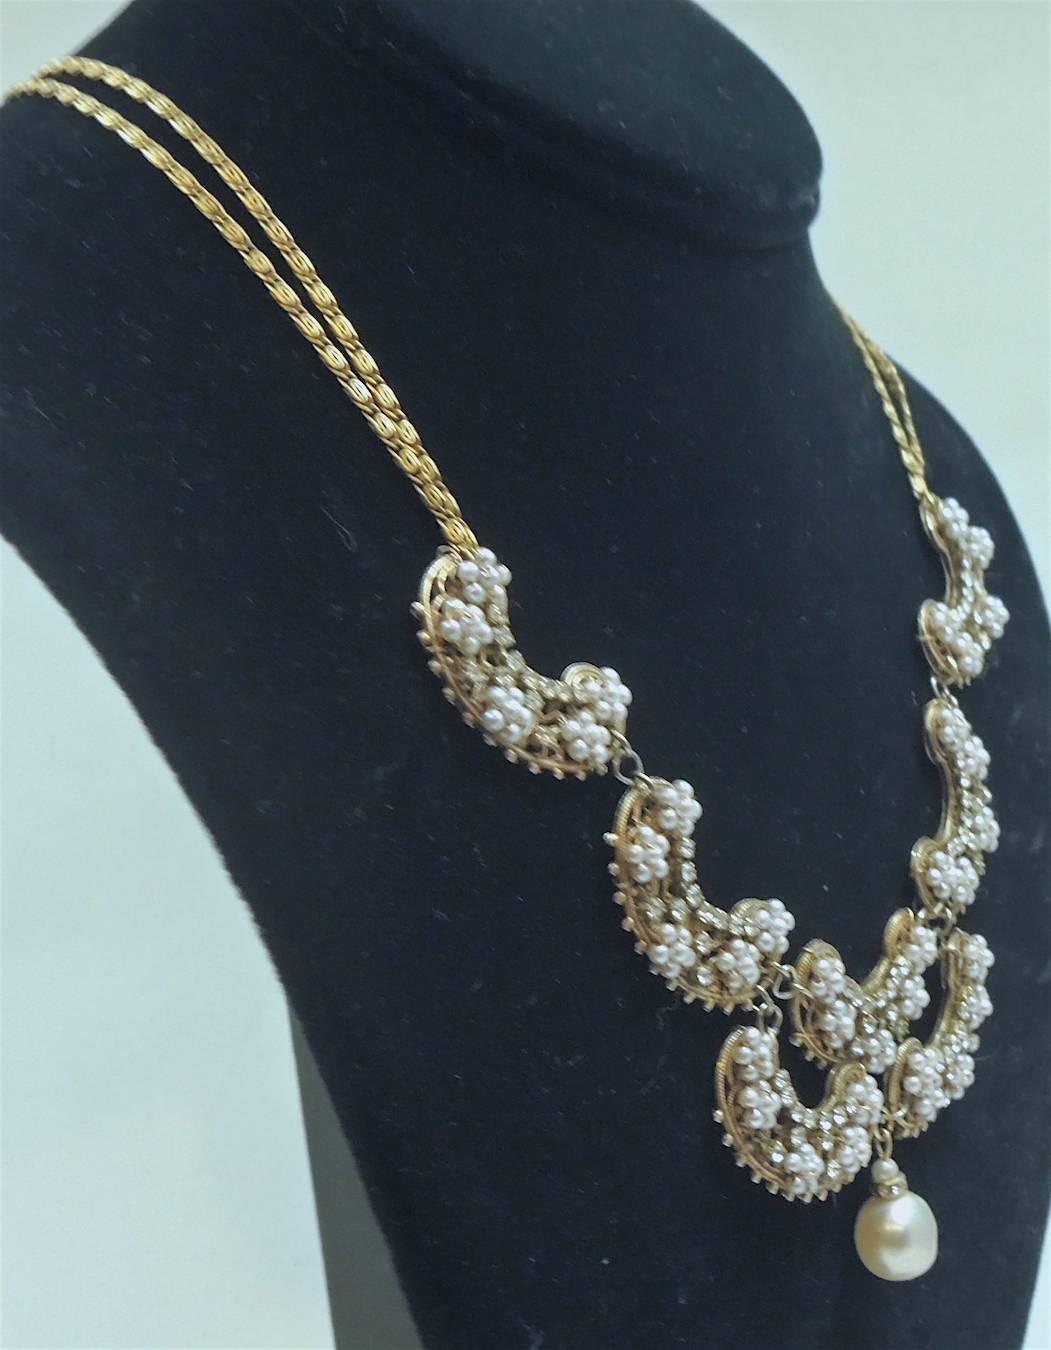 This Miriam Haskell necklace was made in the 1930s before Haskell signed her jewelry and is highly collectible. It has a double chain that leads to seven scallops connected to each other. Each scallop has clusters of seed pearls and rose montee